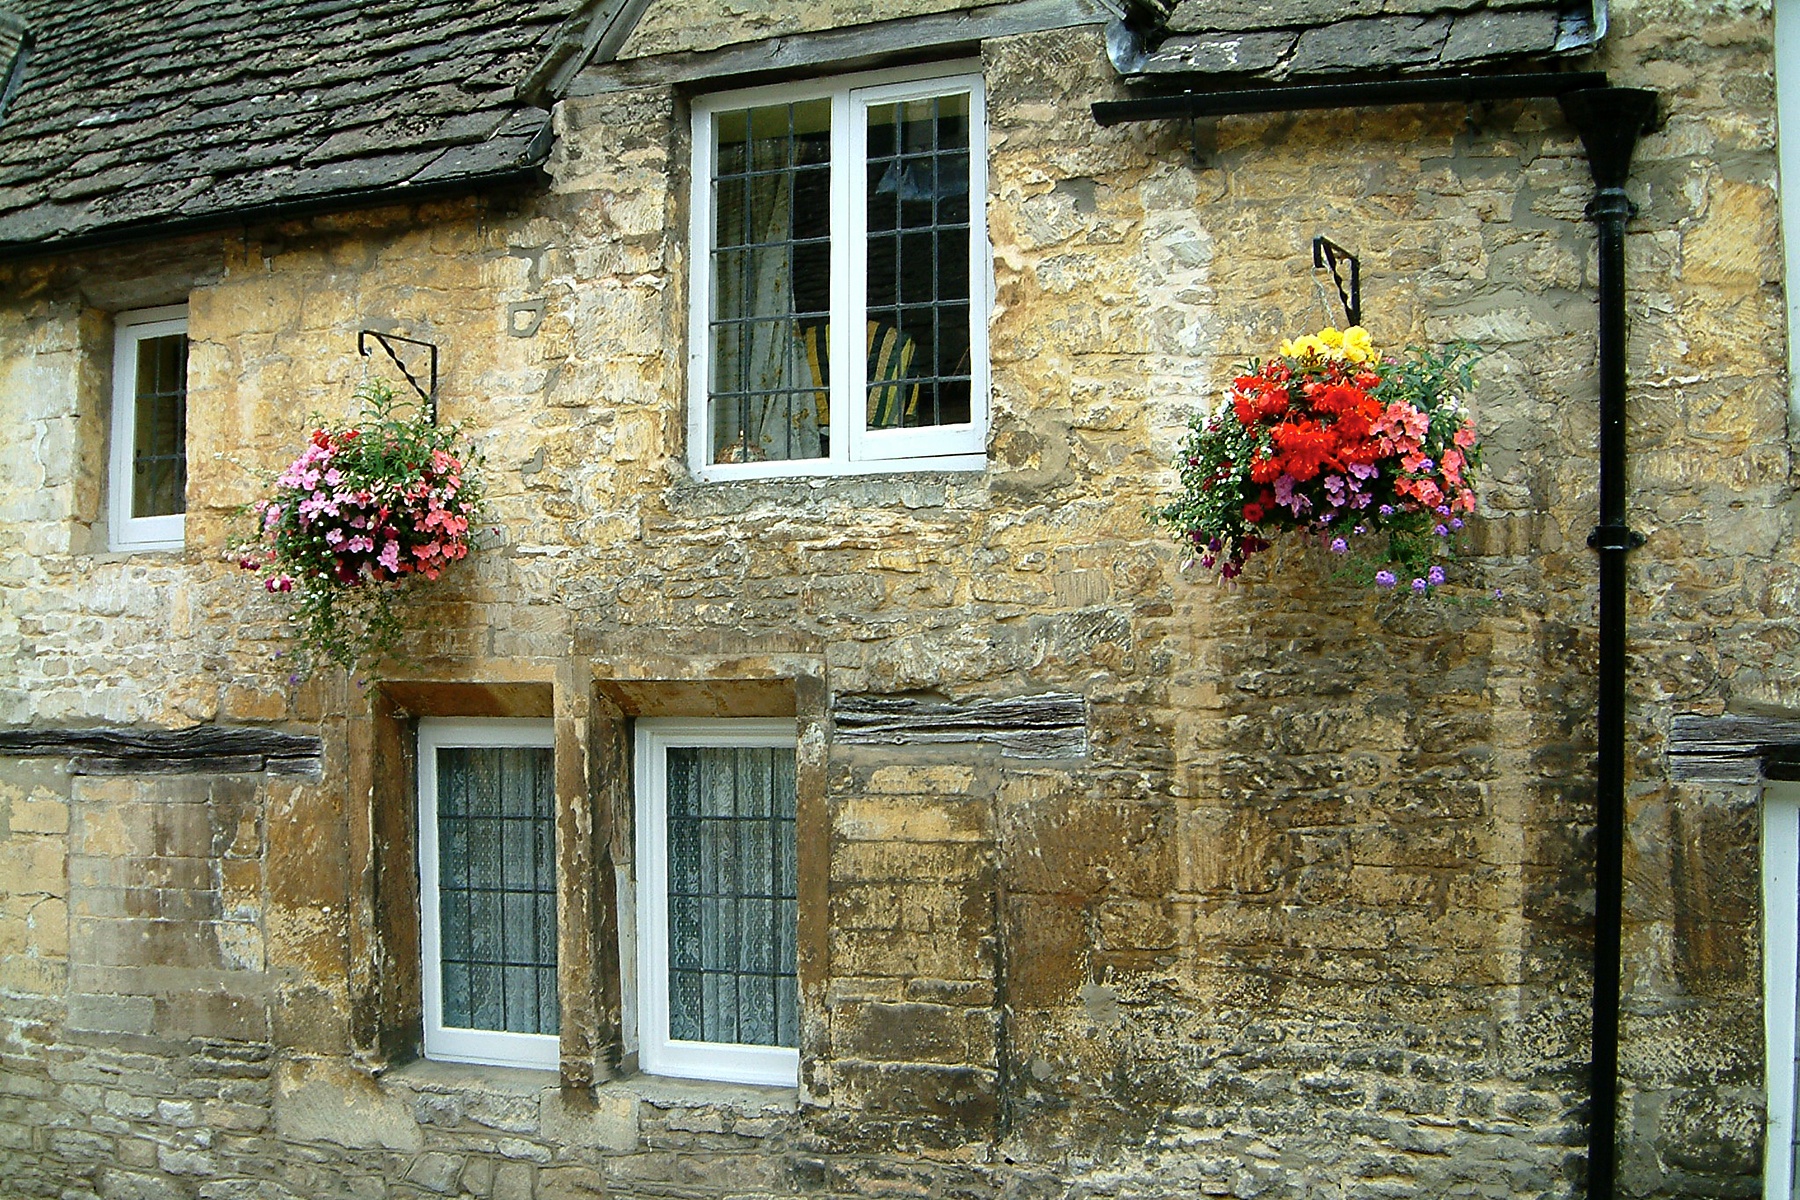 flowers hanging from the windows of a building